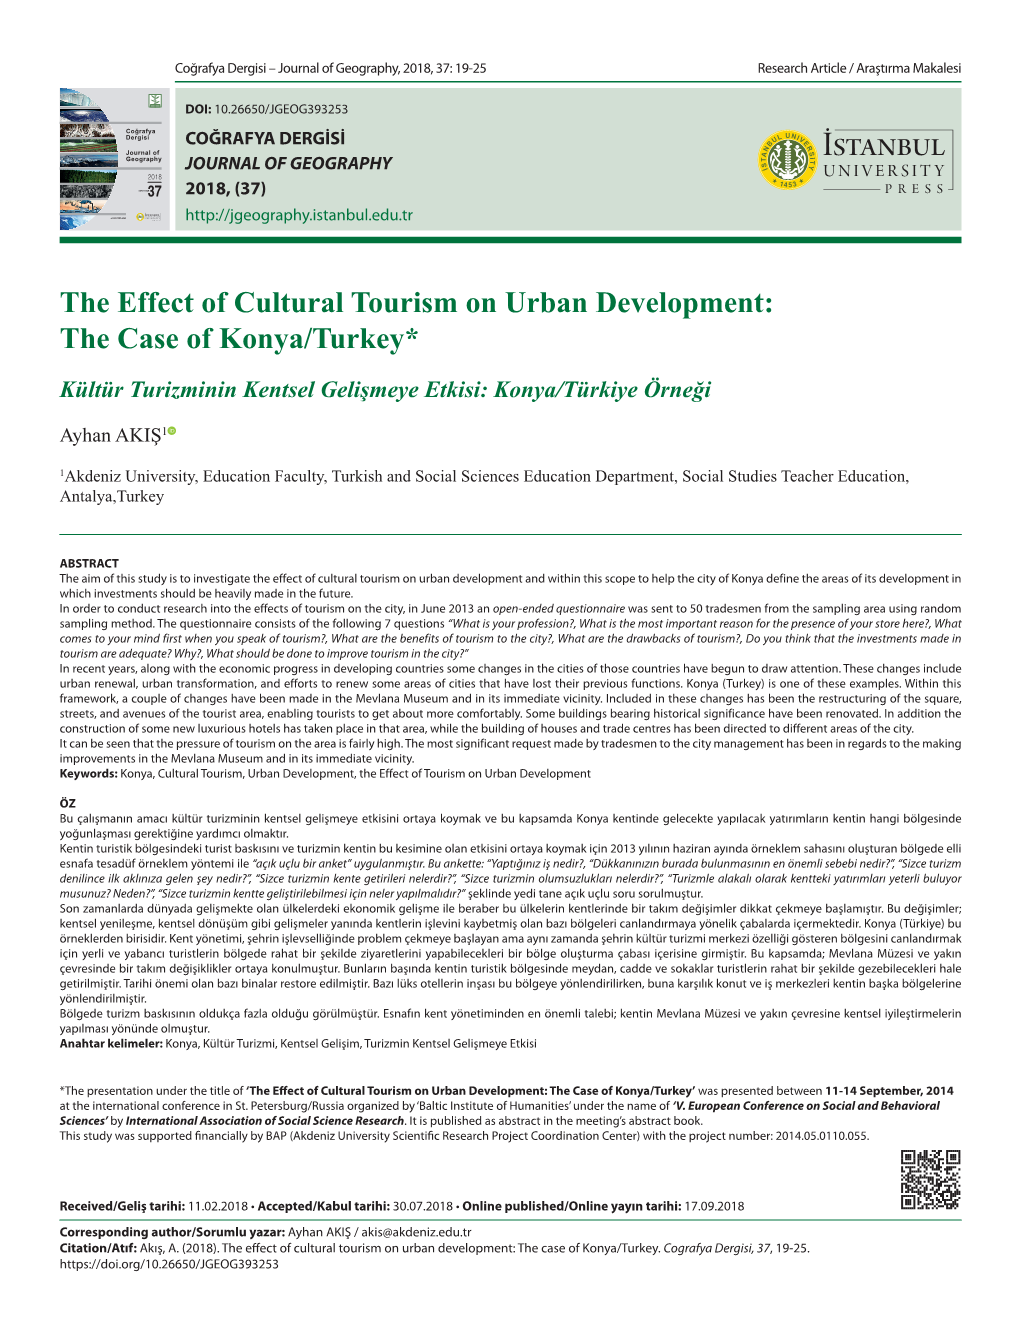 The Effect of Cultural Tourism on Urban Development: the Case of Konya/Turkey*